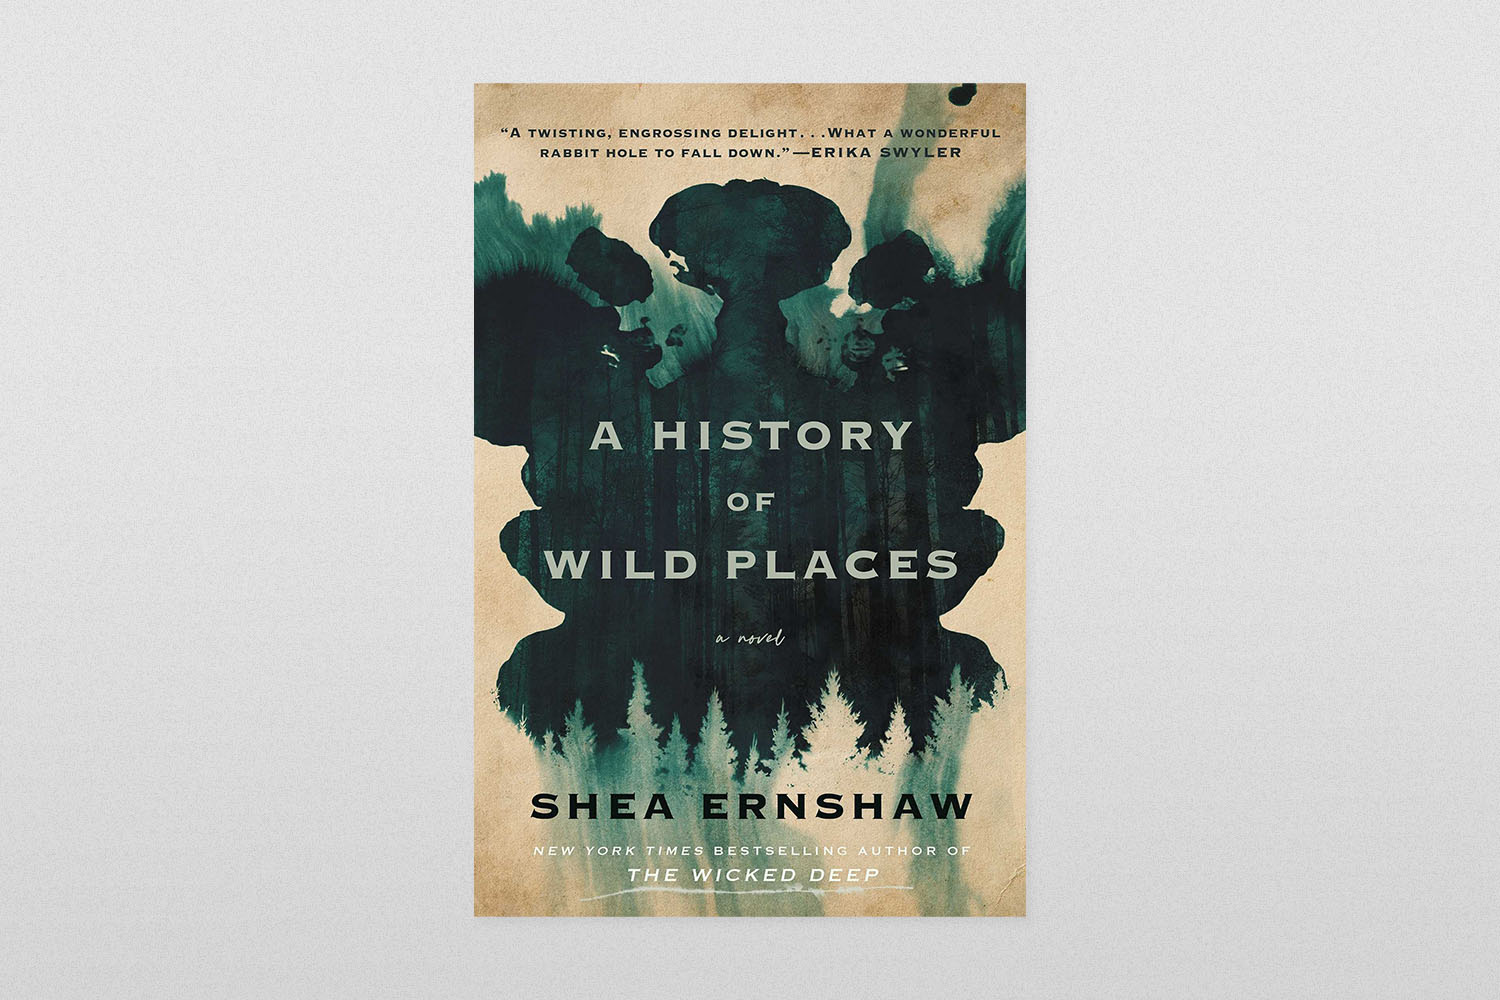 "A History of Wild Places"